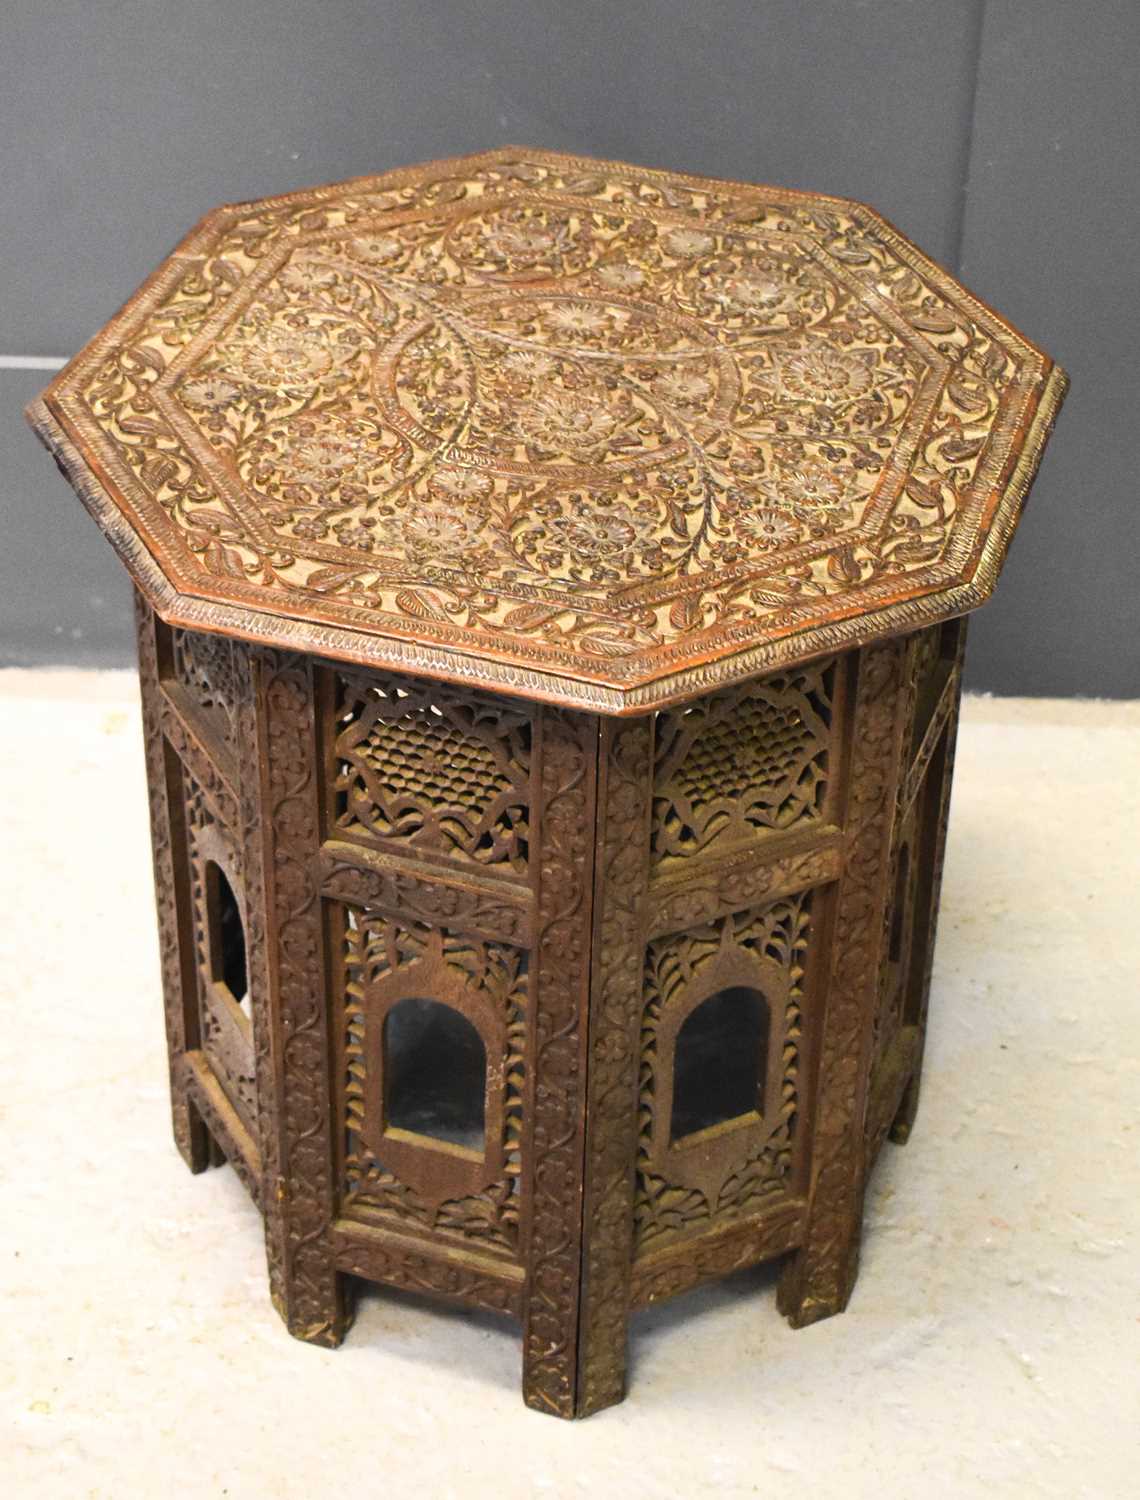 A small Indian carved table with folding base composed of pierced decorative panels and having an - Image 2 of 2